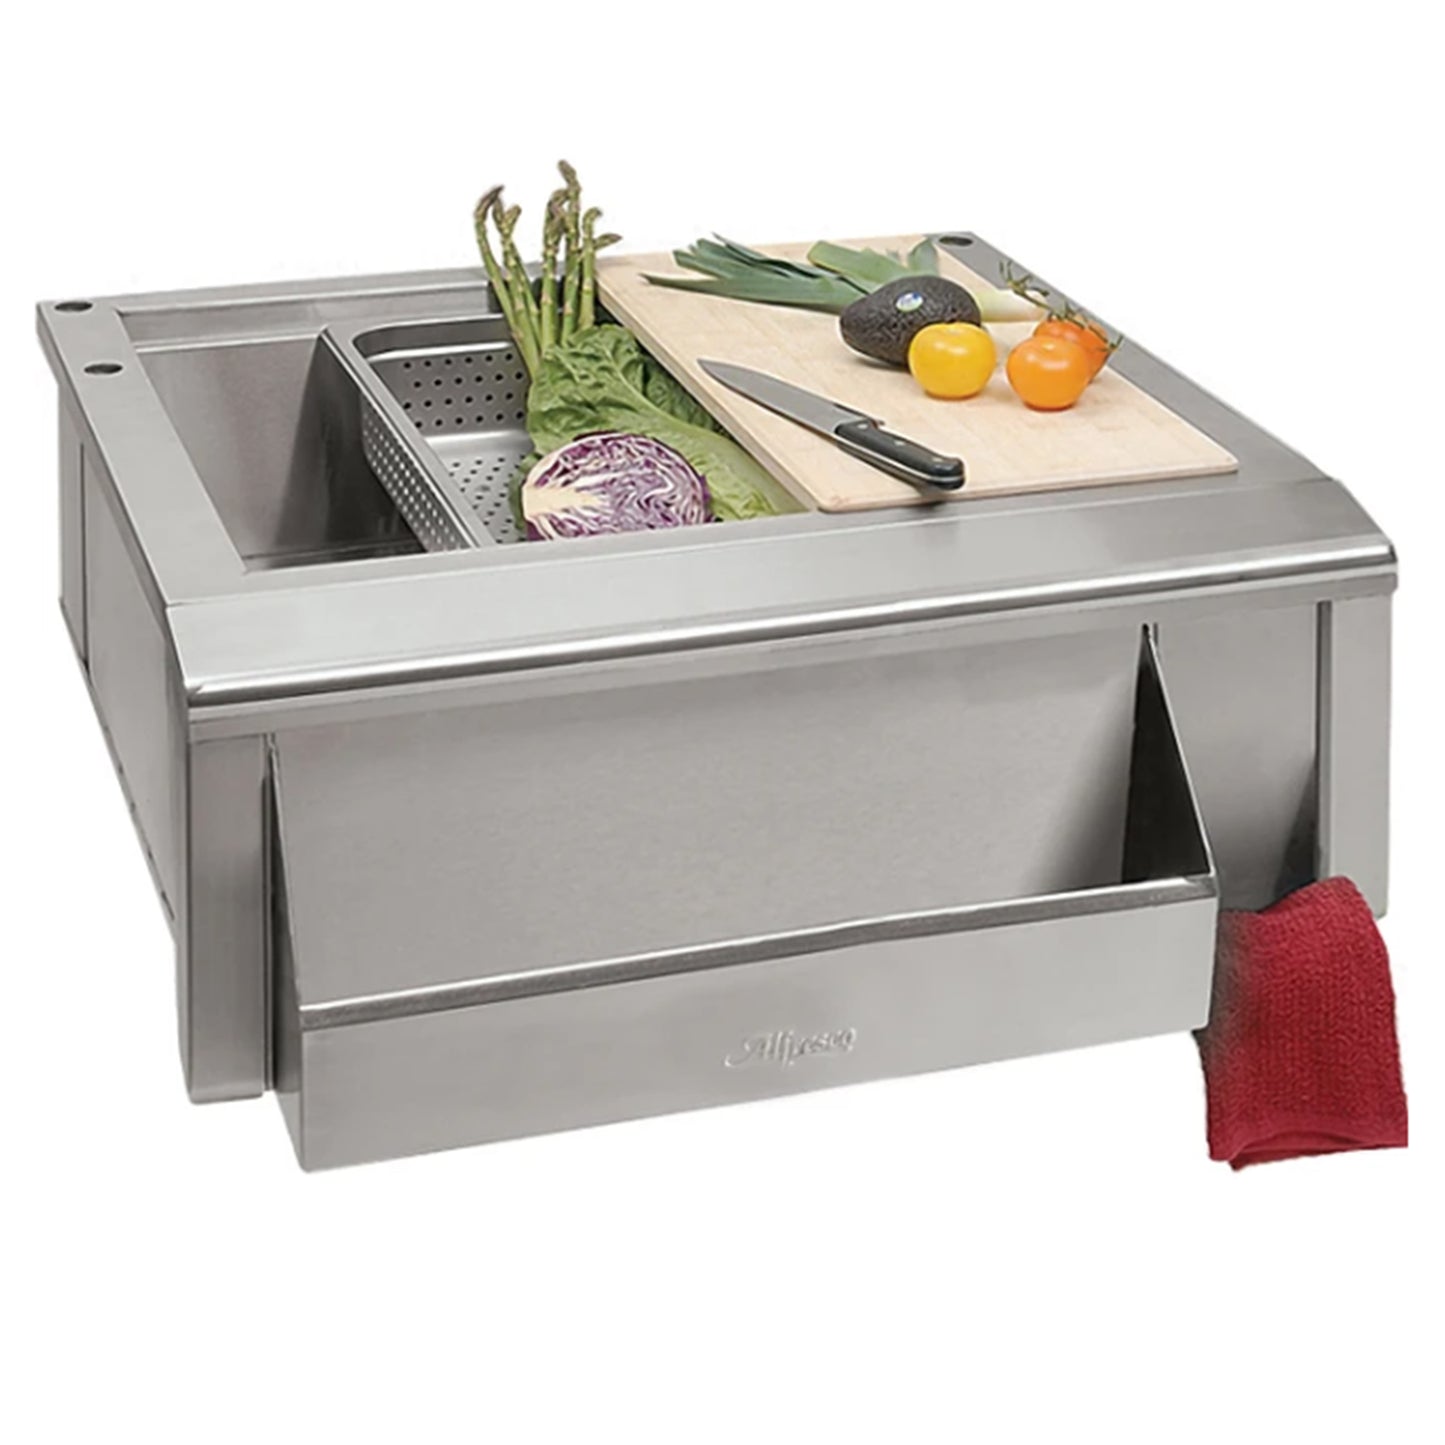 Alfresco Preparation Package for a 30-Inch Sink